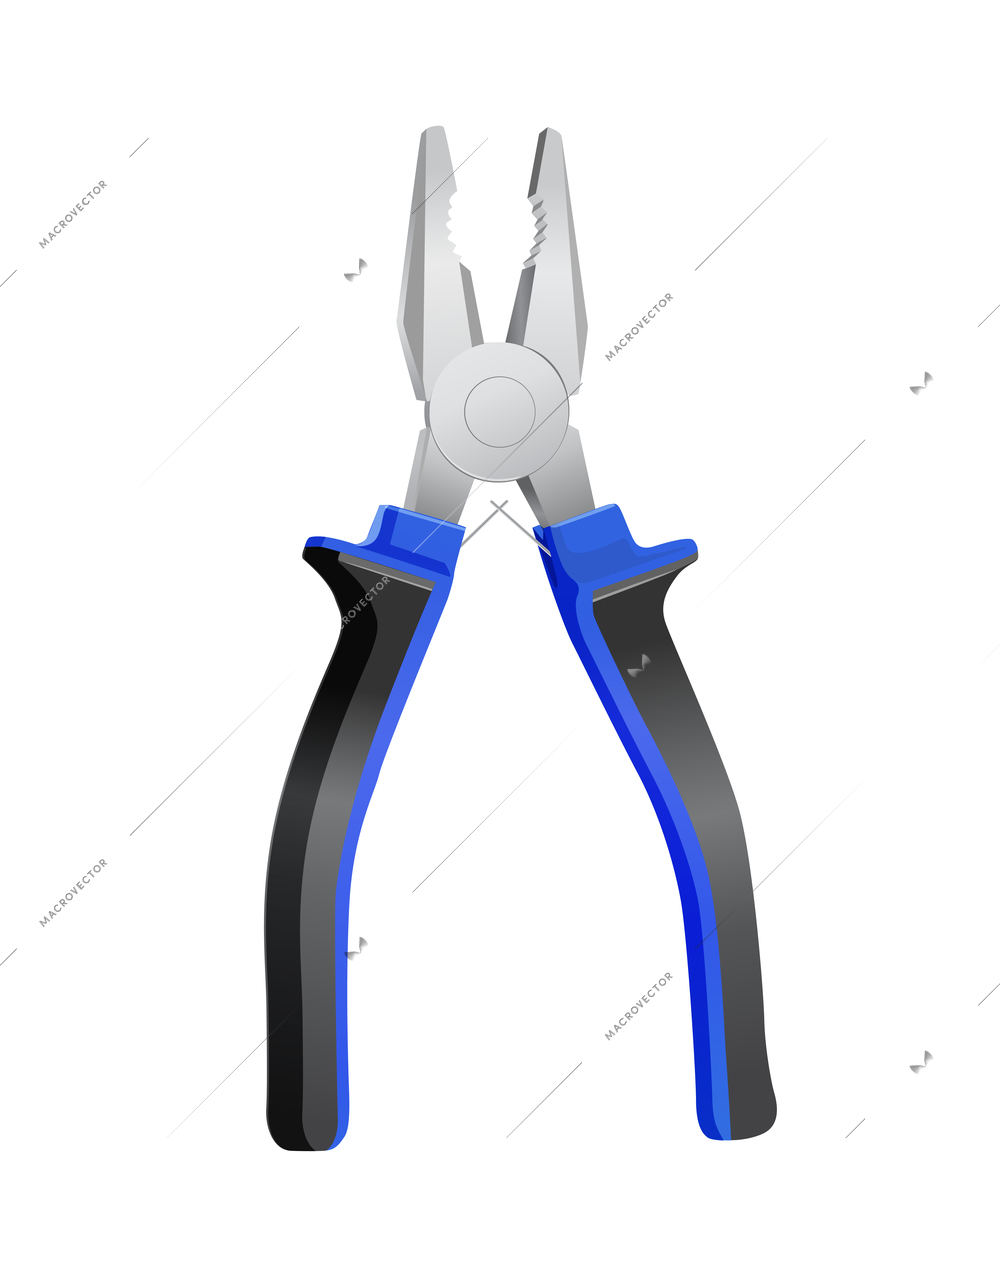 Realistic tools composition with house maintenance and repair tool isolated on blank background vector illustration